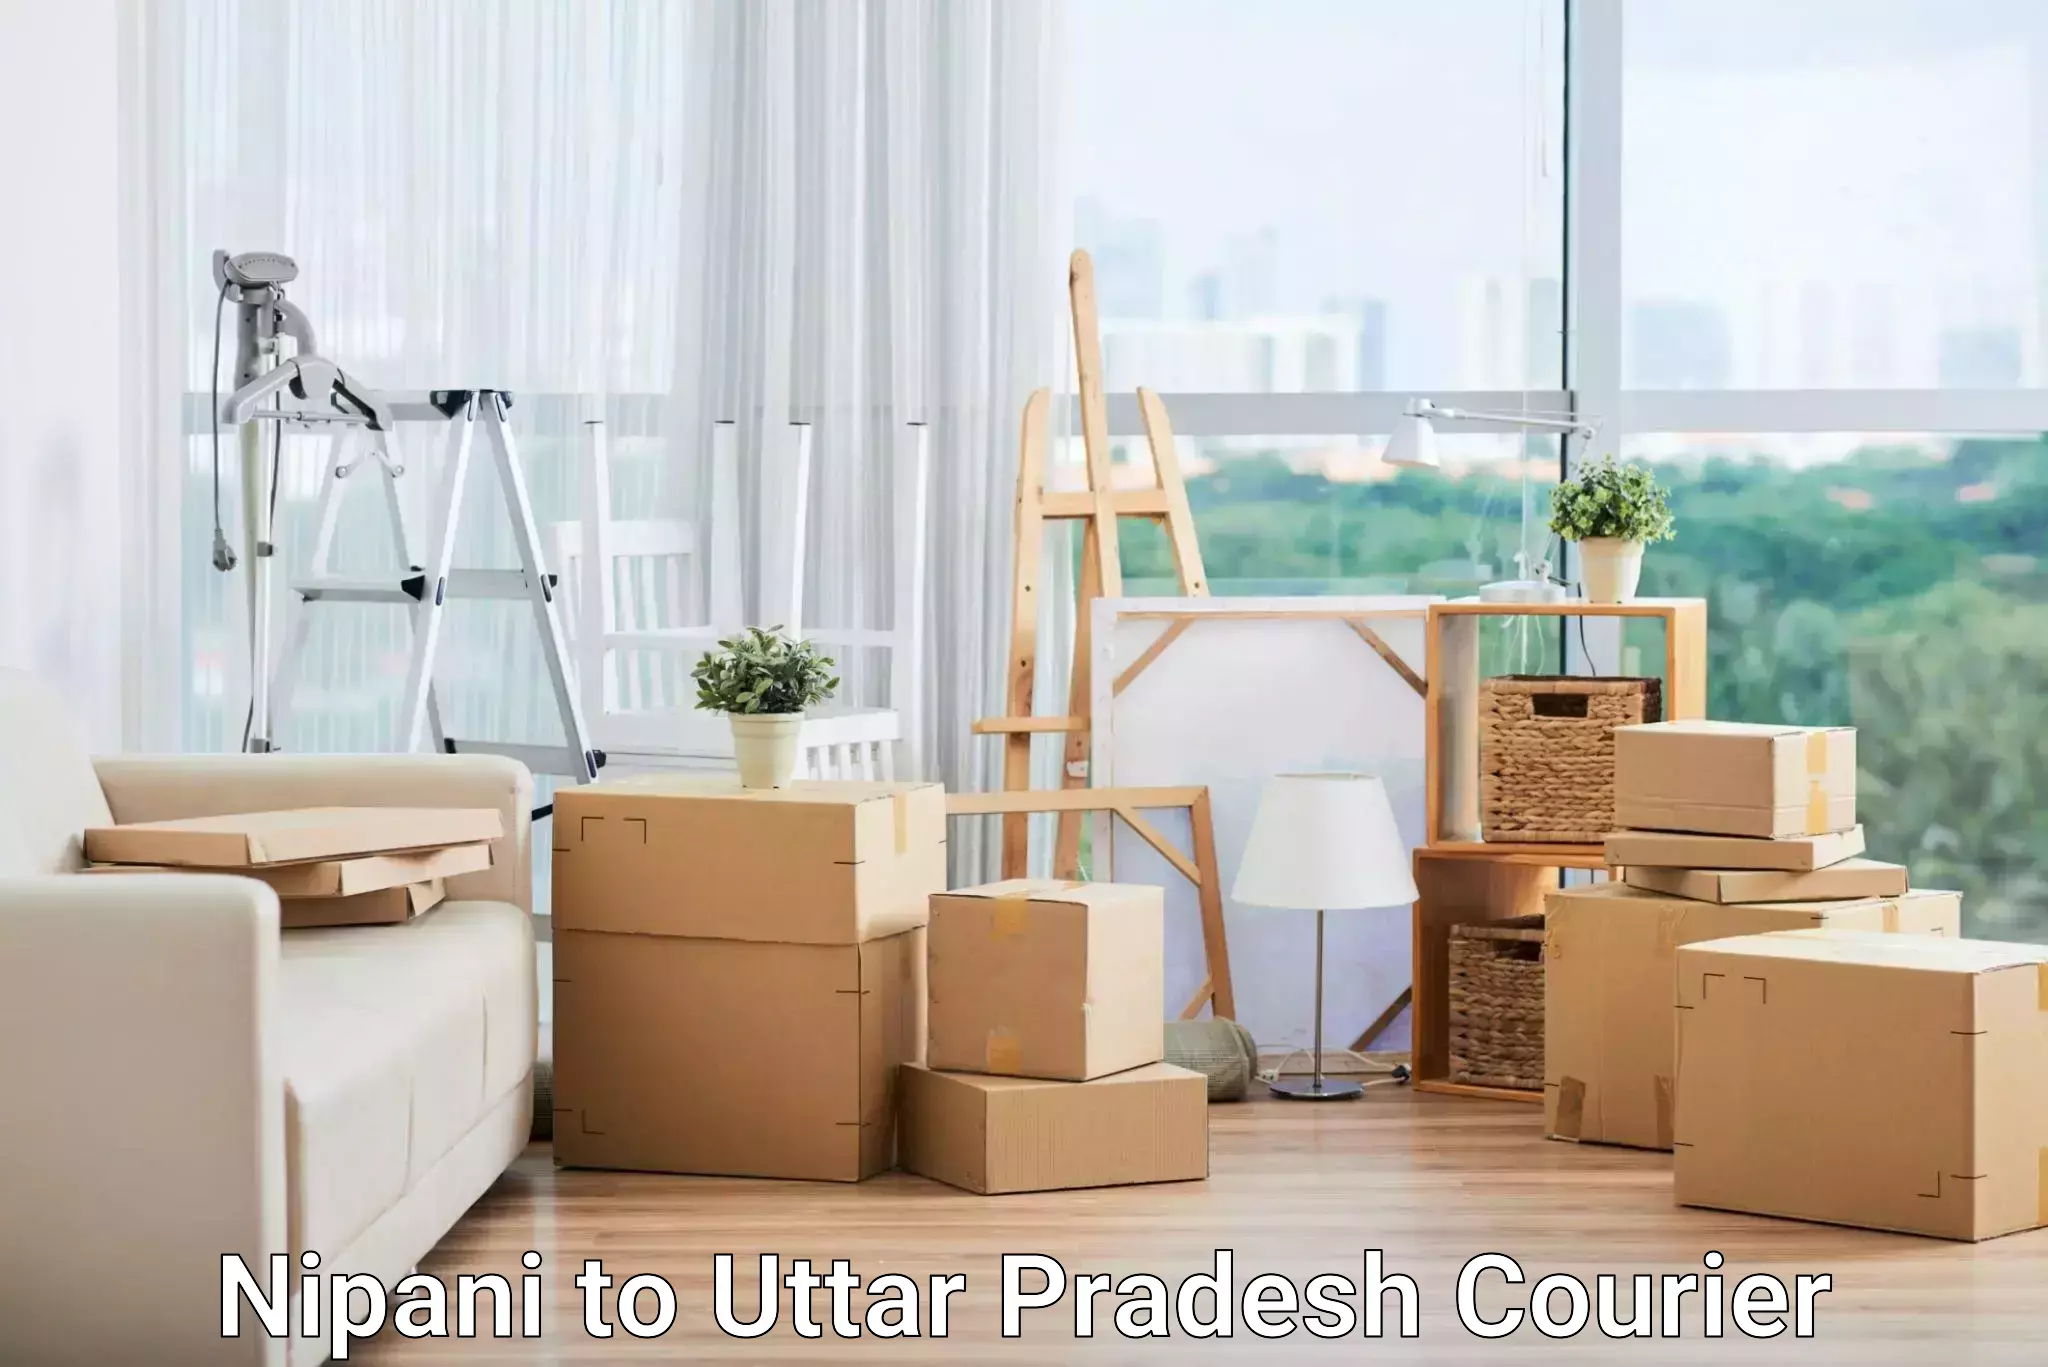 Round-the-clock parcel delivery Nipani to Aligarh